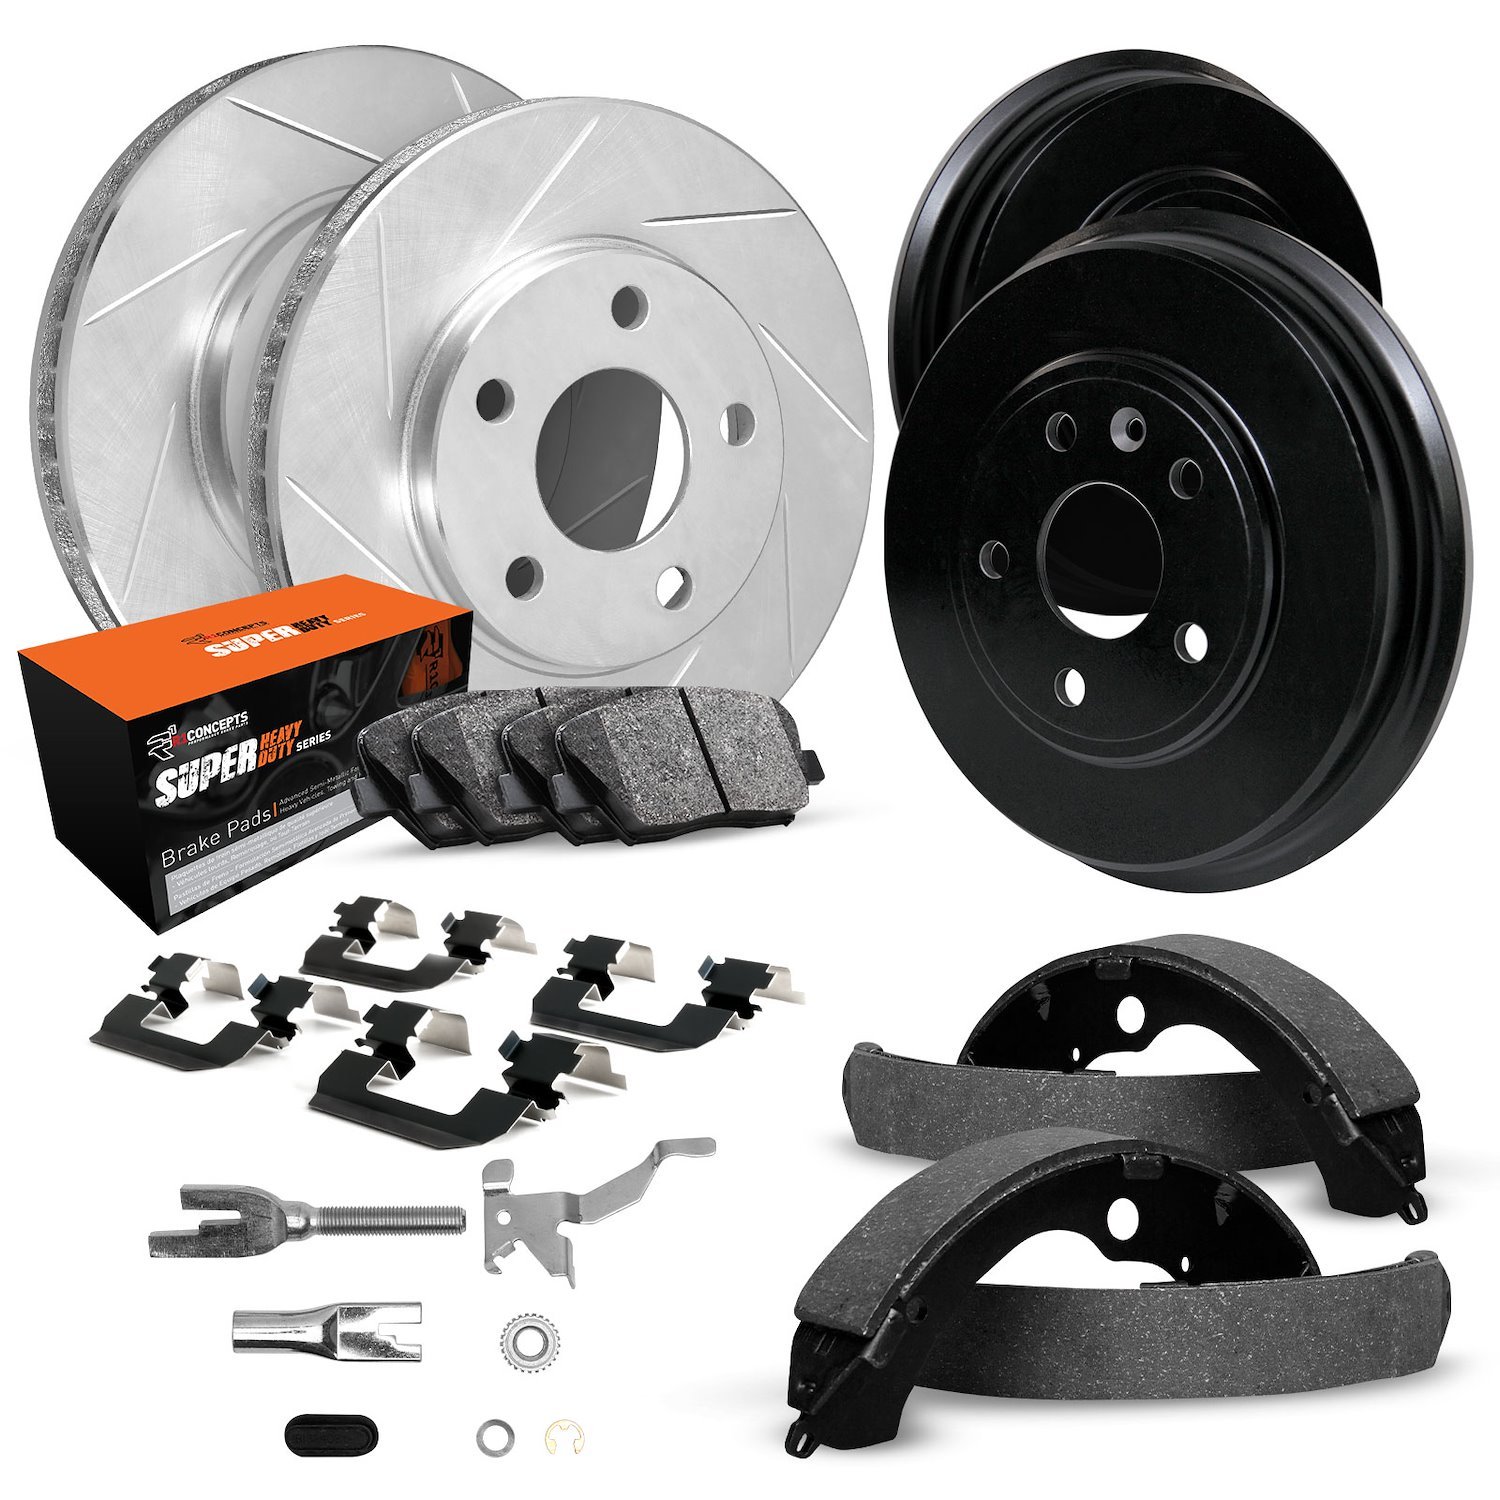 E-Line Slotted Silver Rotor & Drum Set w/Super-Duty Pads, Shoes/Hardware/Adjusters, 2001-2002 GM